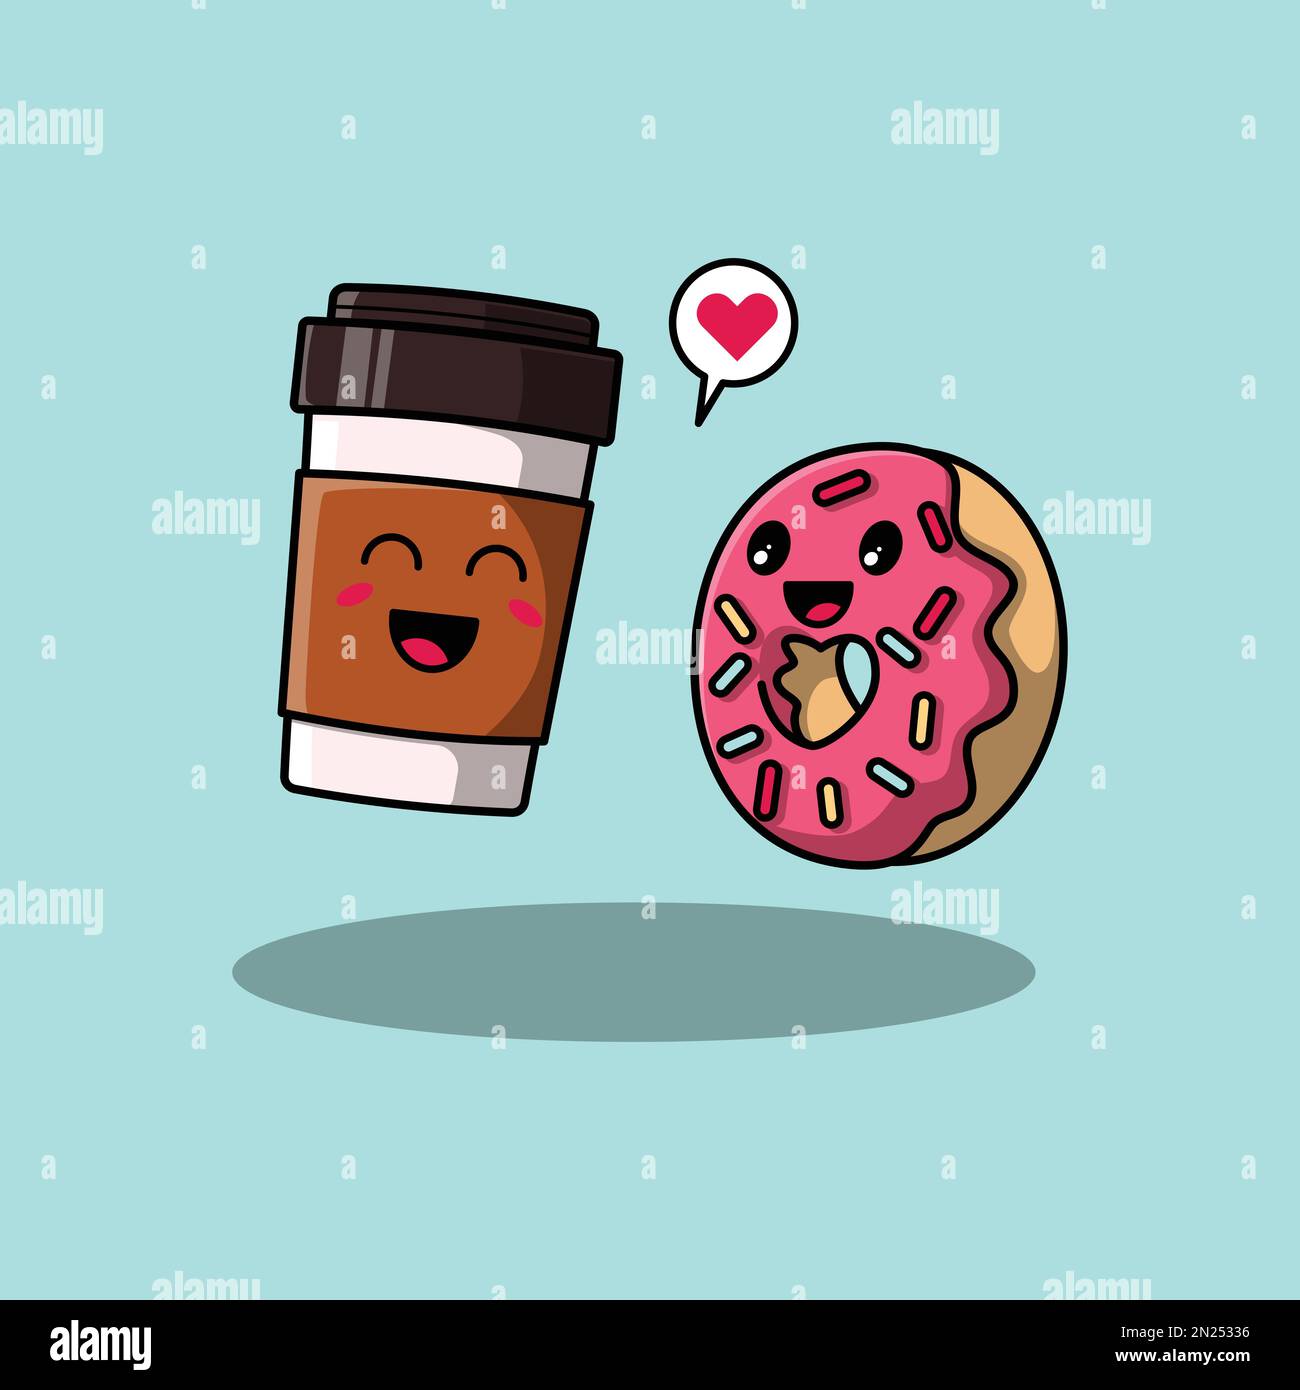 Doodle Cartoon of Coffee Cup and Donut. Love Couple Vector Illustration Design. Stock Vector